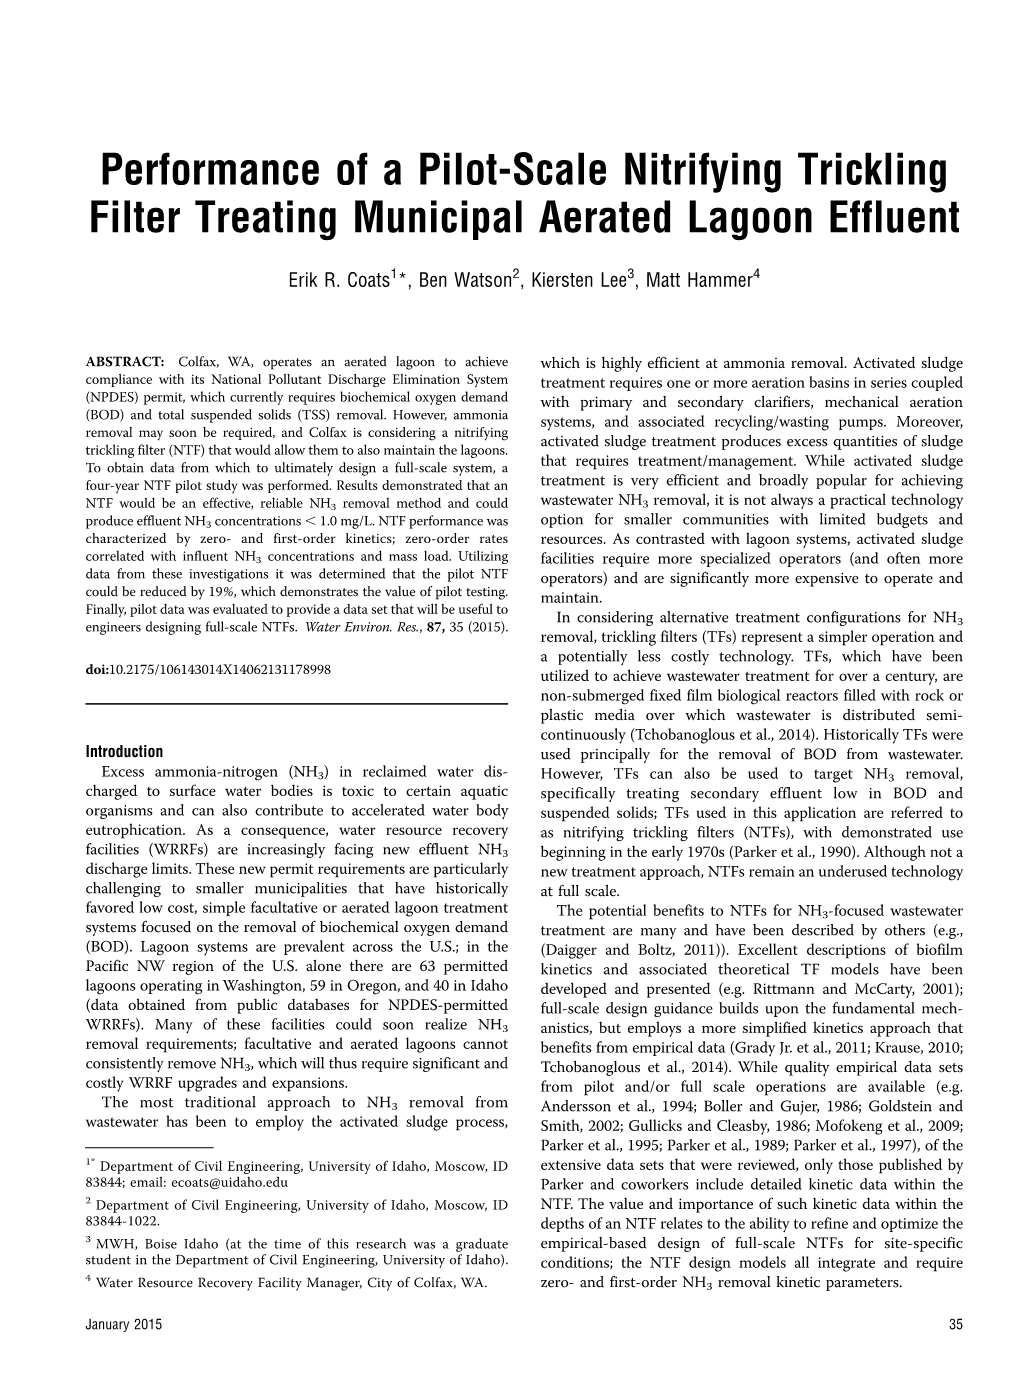 Performance of a Pilot-Scale Nitrifying Trickling Filter Treating Municipal Aerated Lagoon Effluent